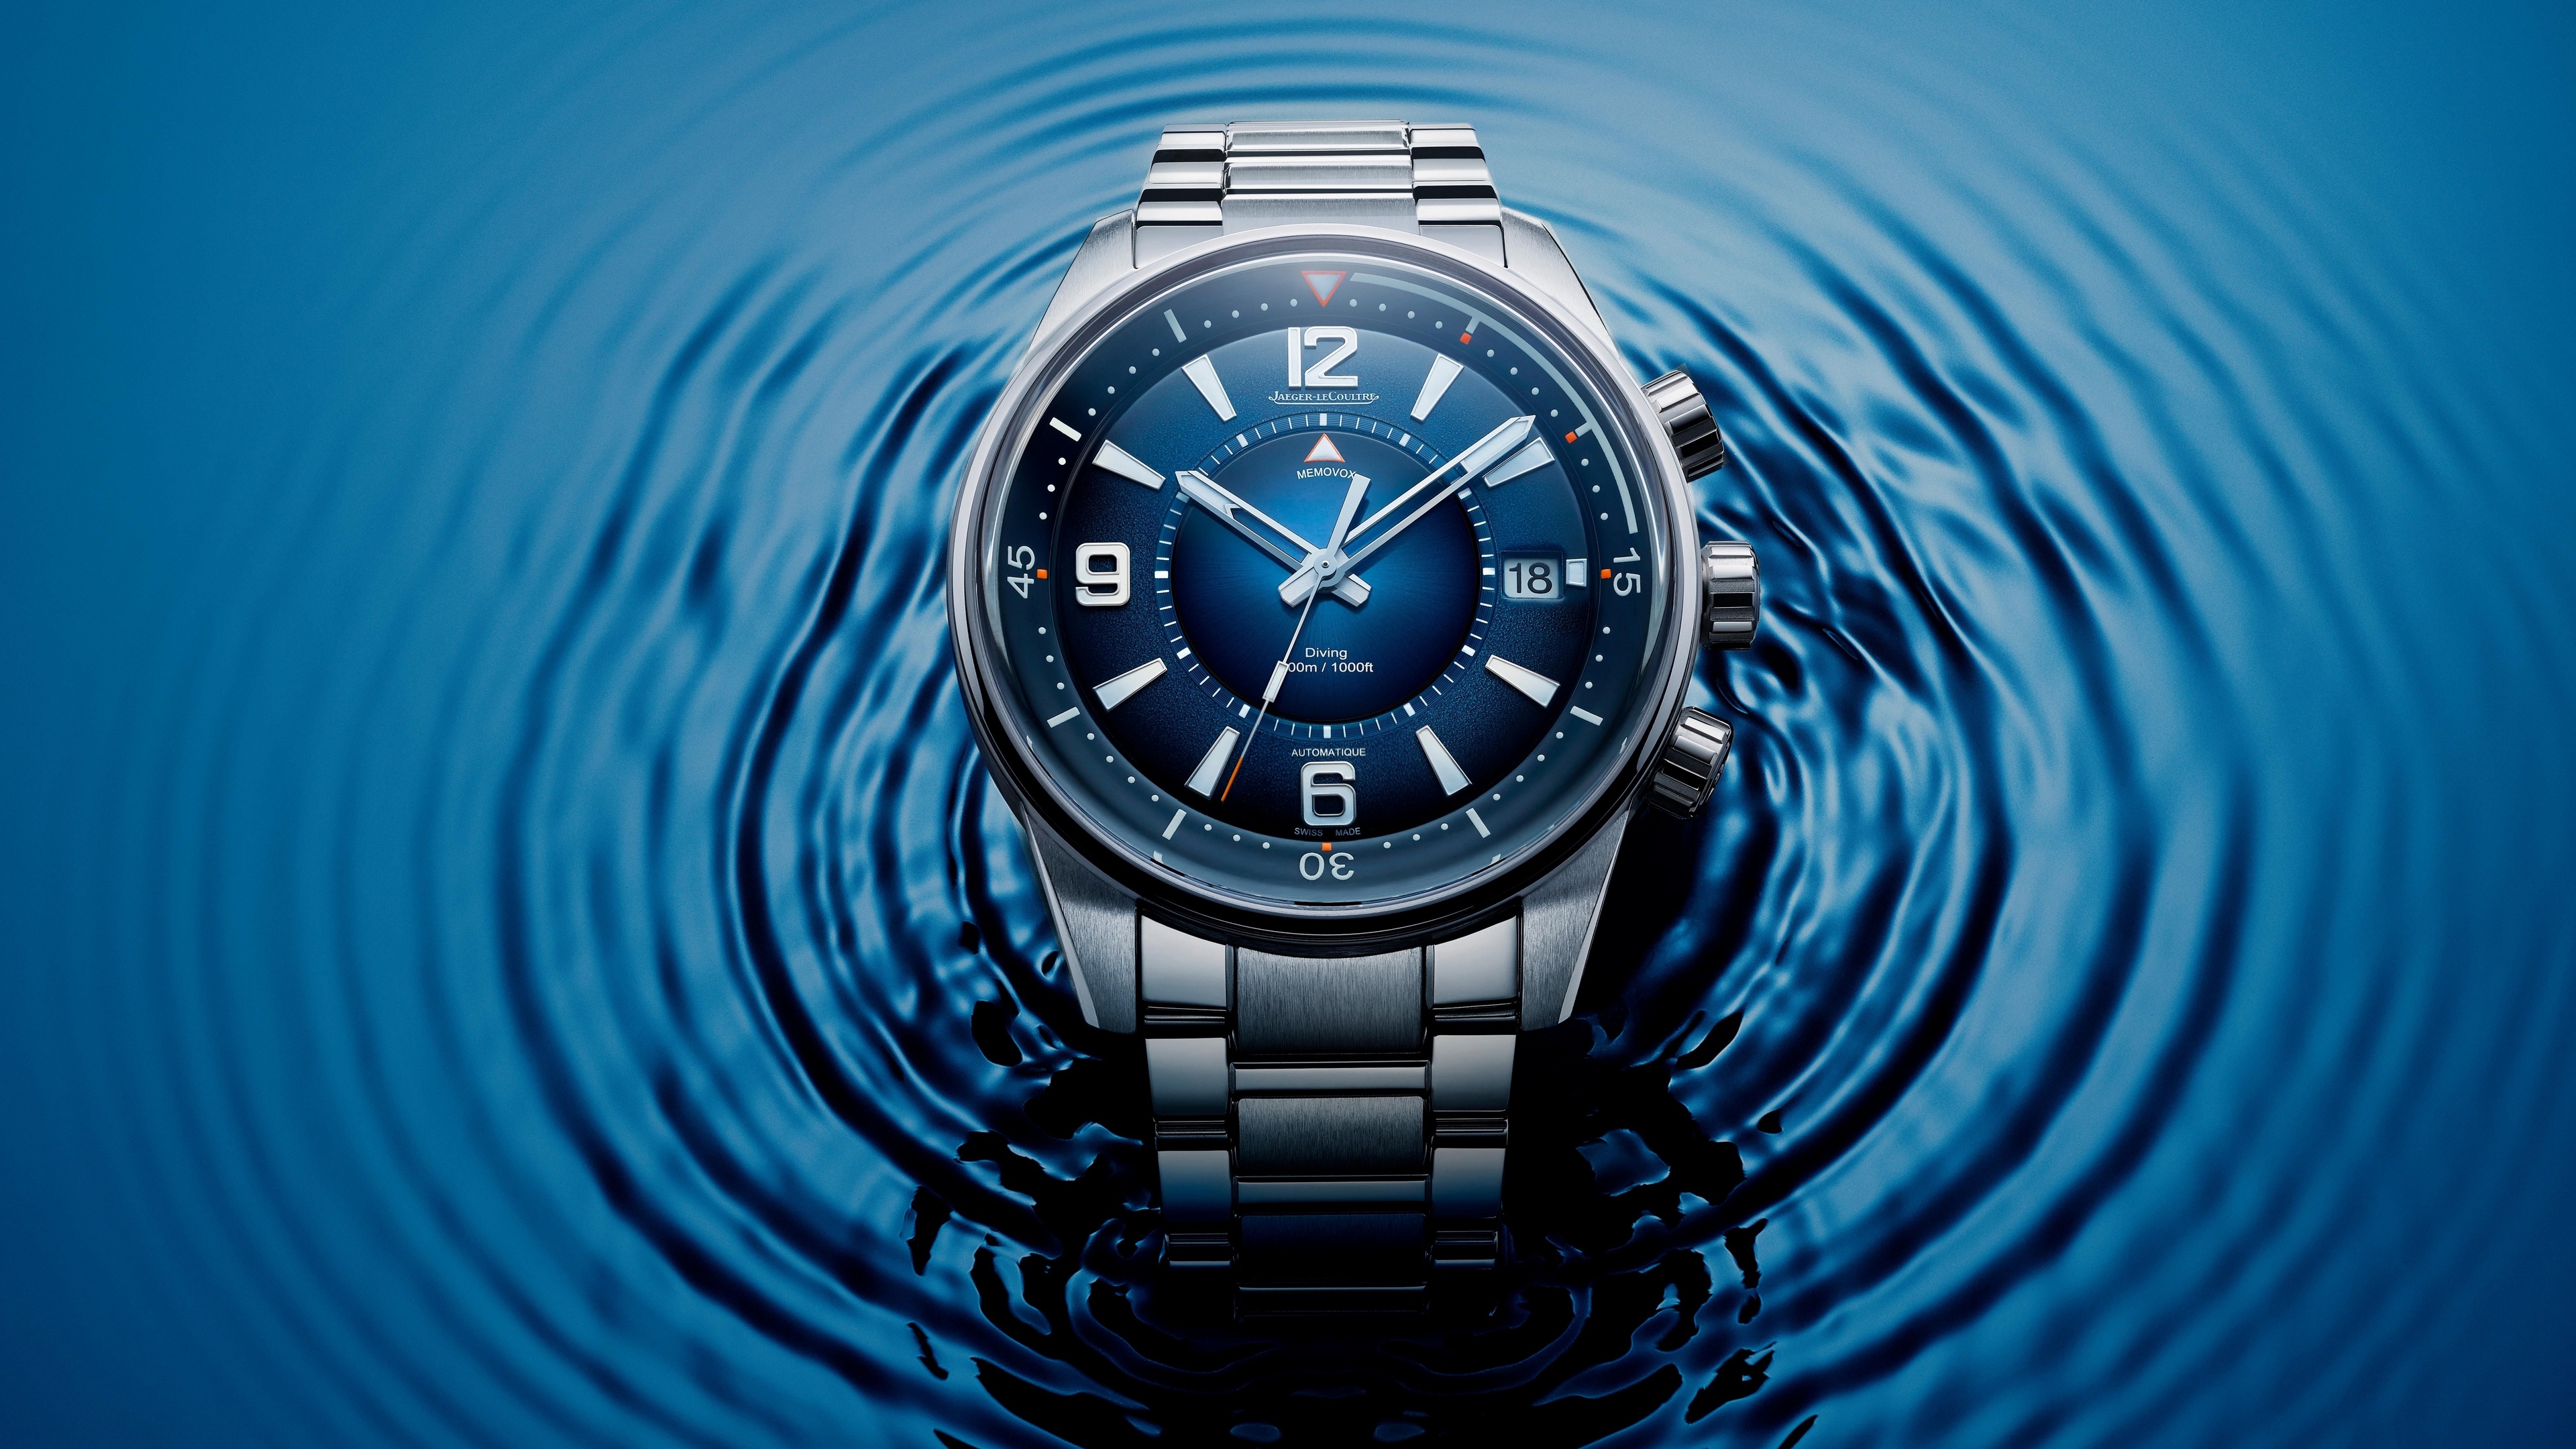 General 3840x2160 Jaeger LeCoultre watch technology numbers luxury watches wristwatch blue background closeup digital art water ripples ripples minimalism time